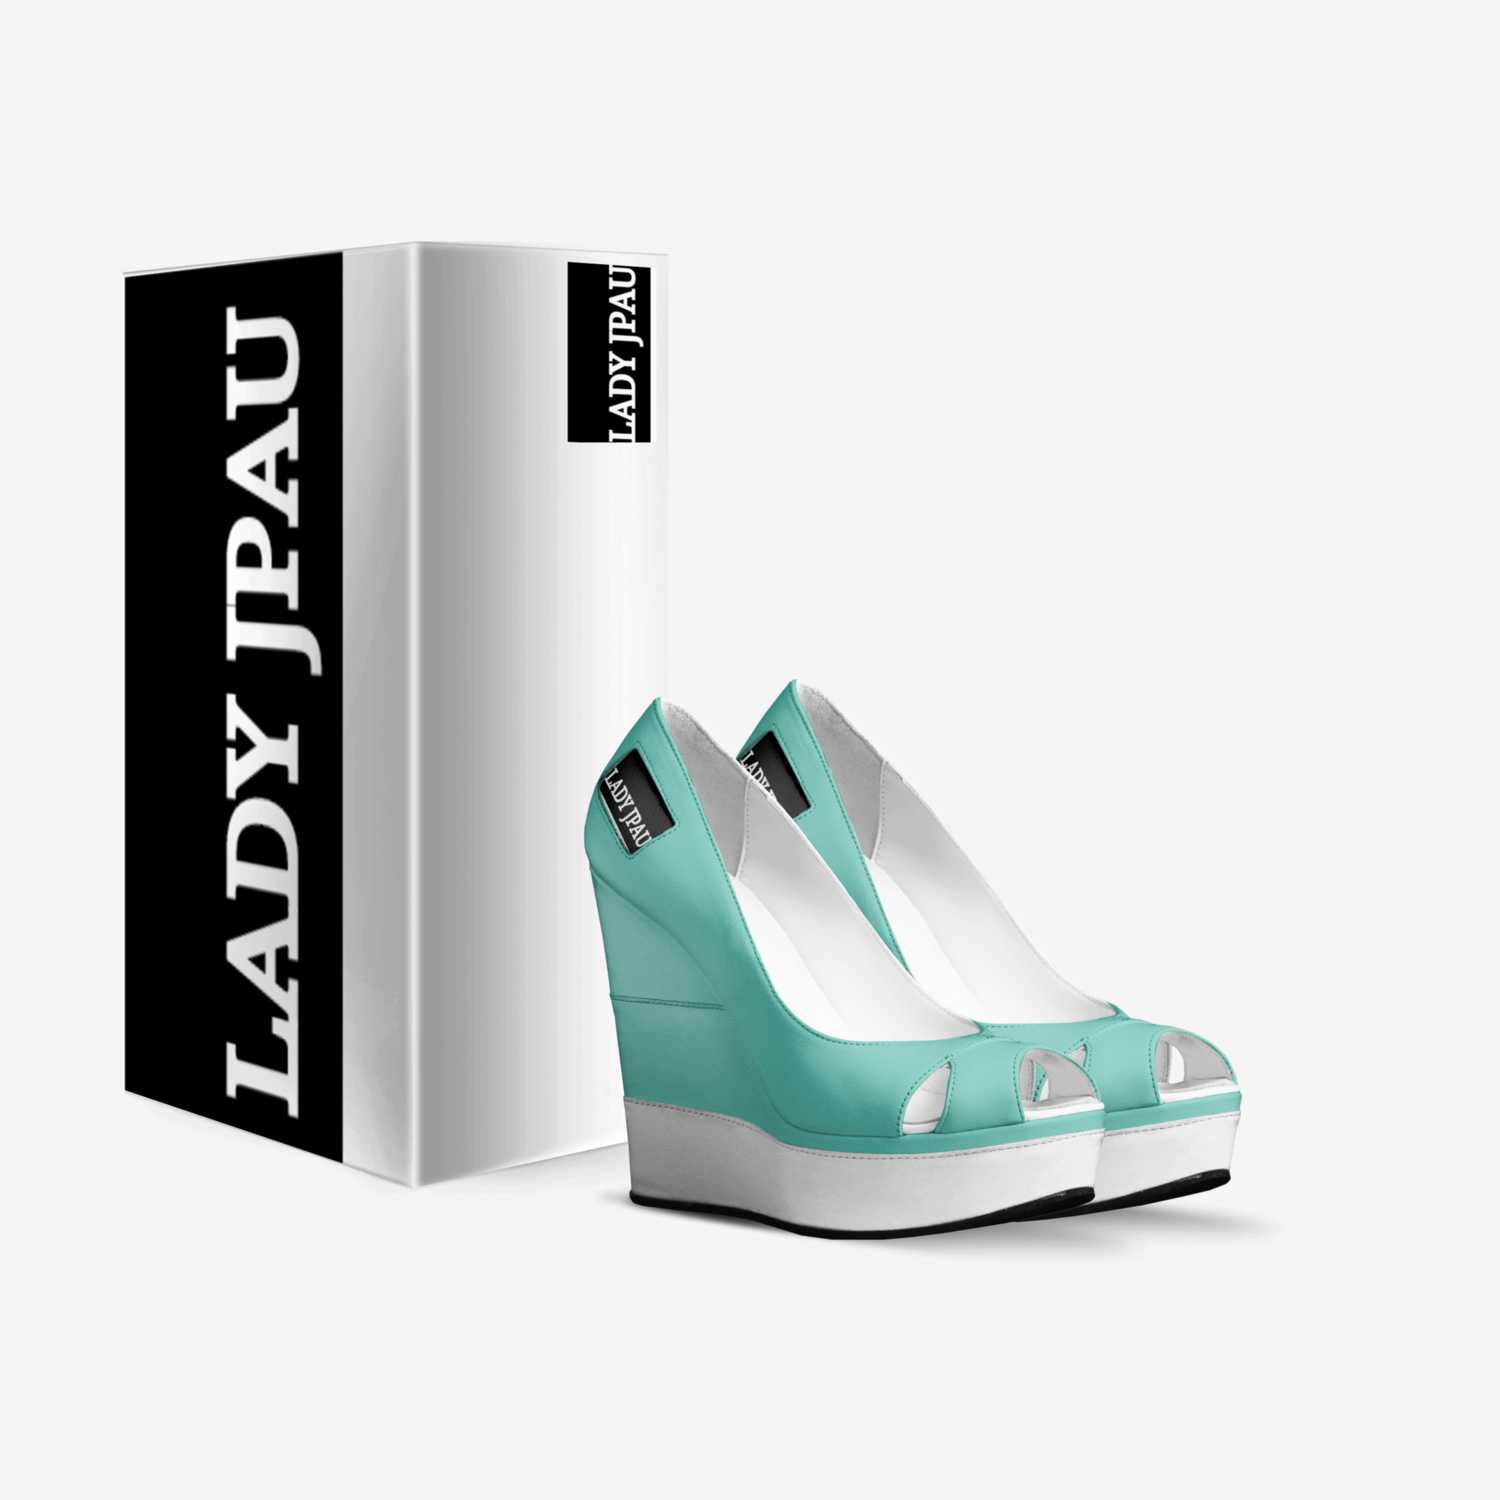 Lady JPau custom made in Italy shoes by Jeanette Pau | Box view